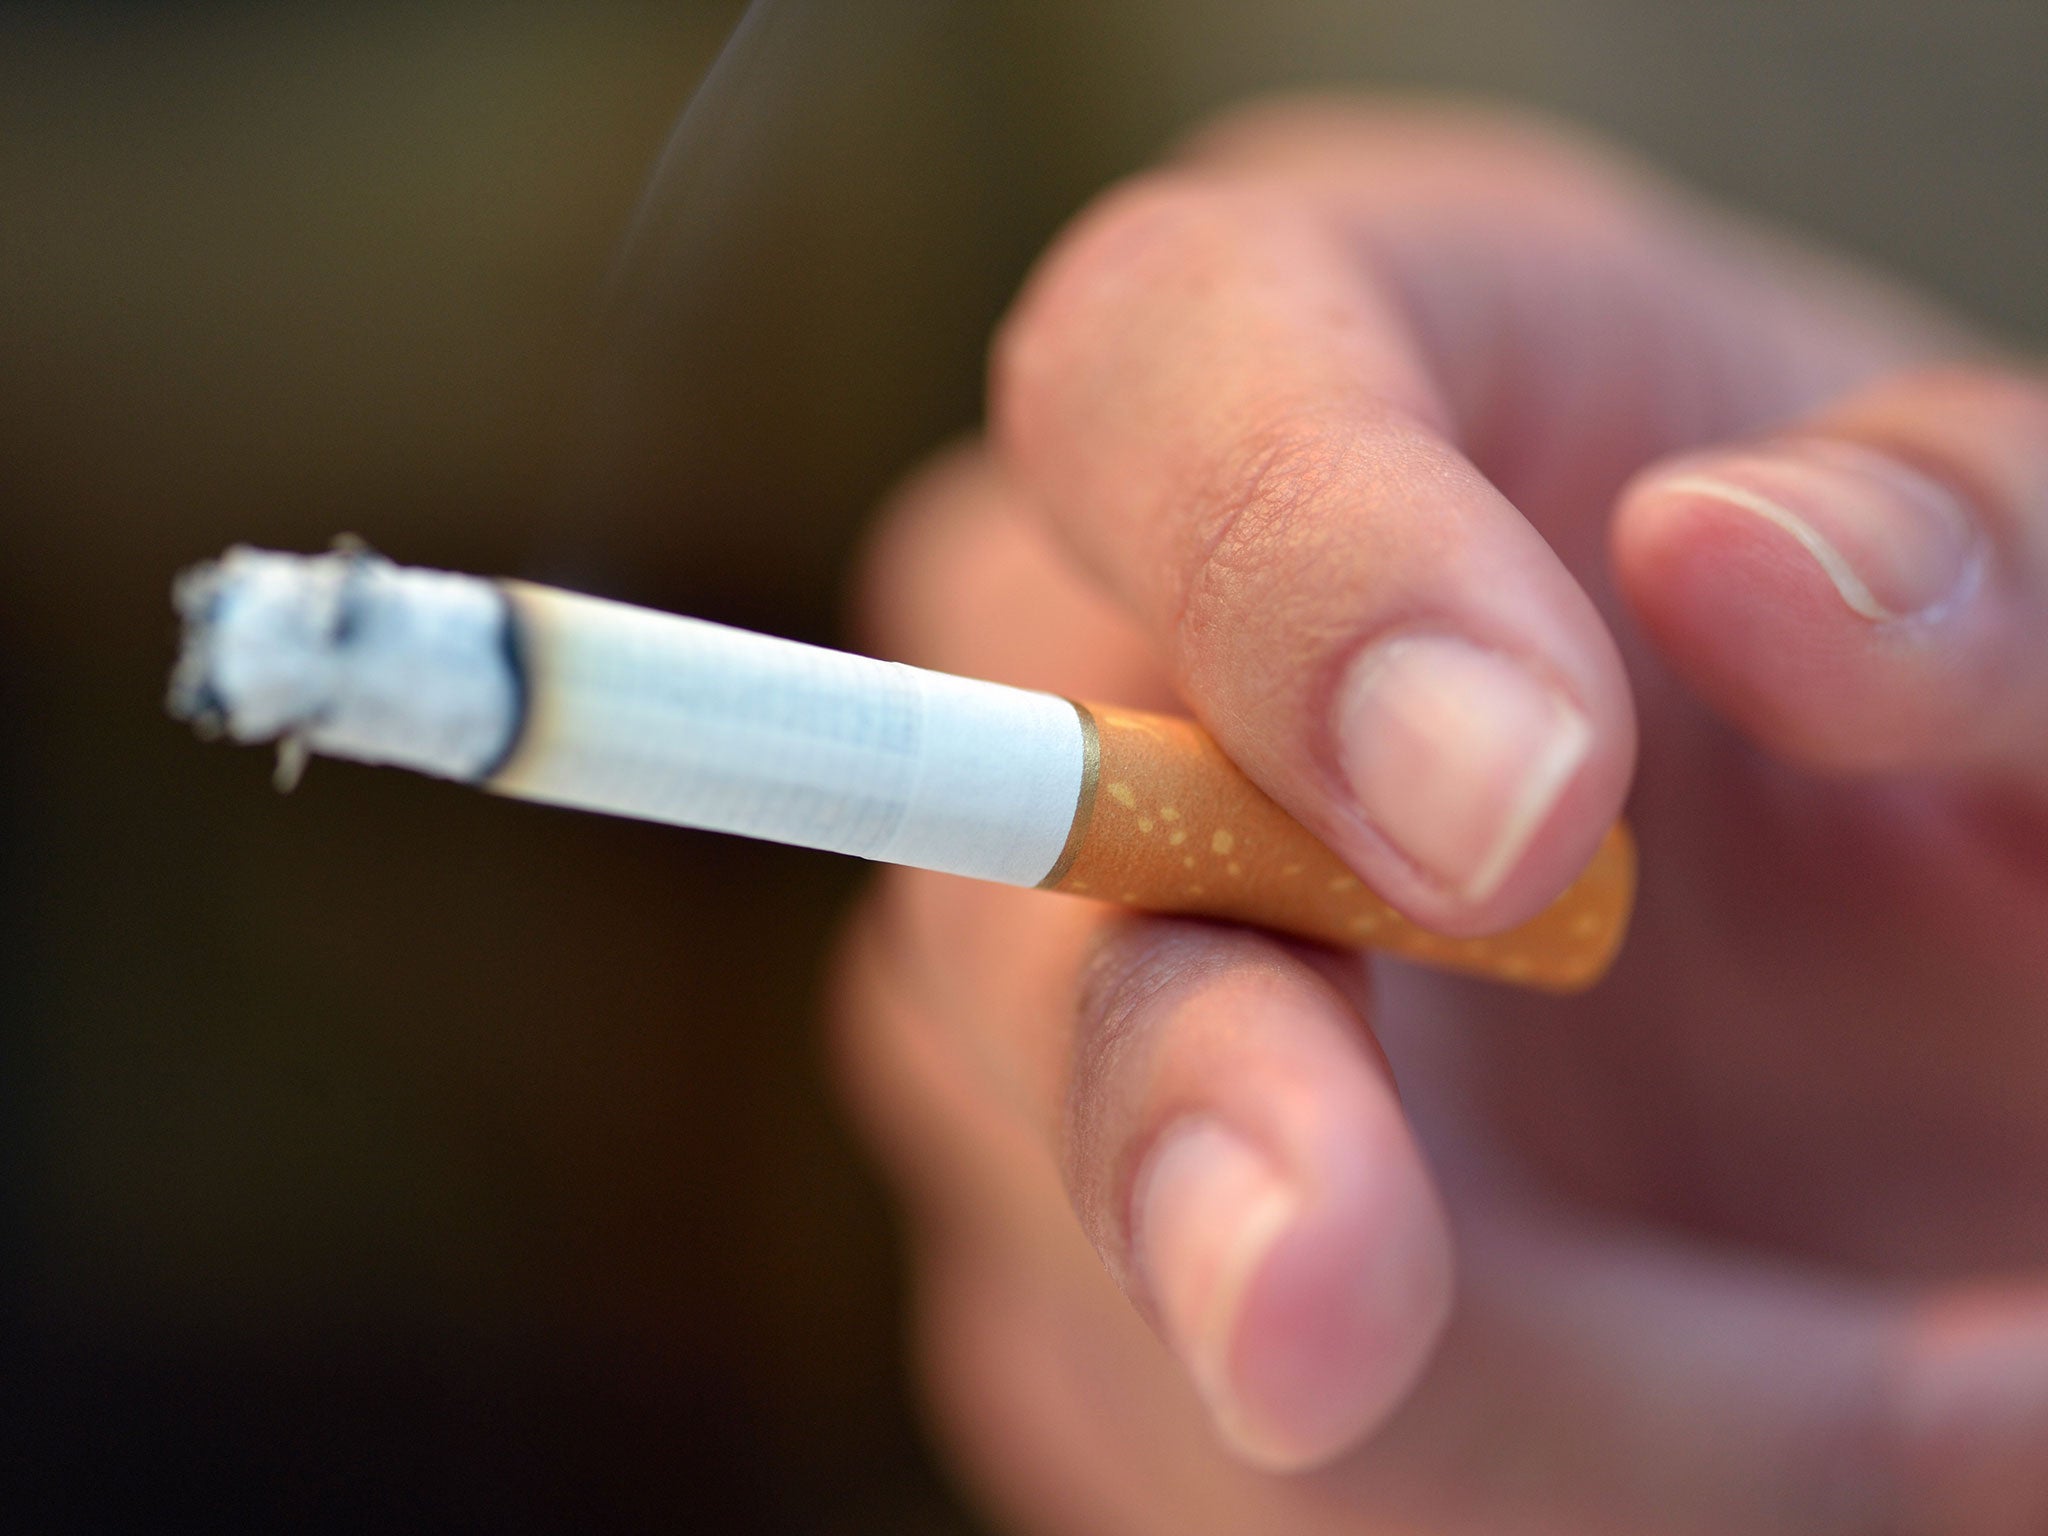 Countries around the world have raised the smoking age in recent years in response to health concerns